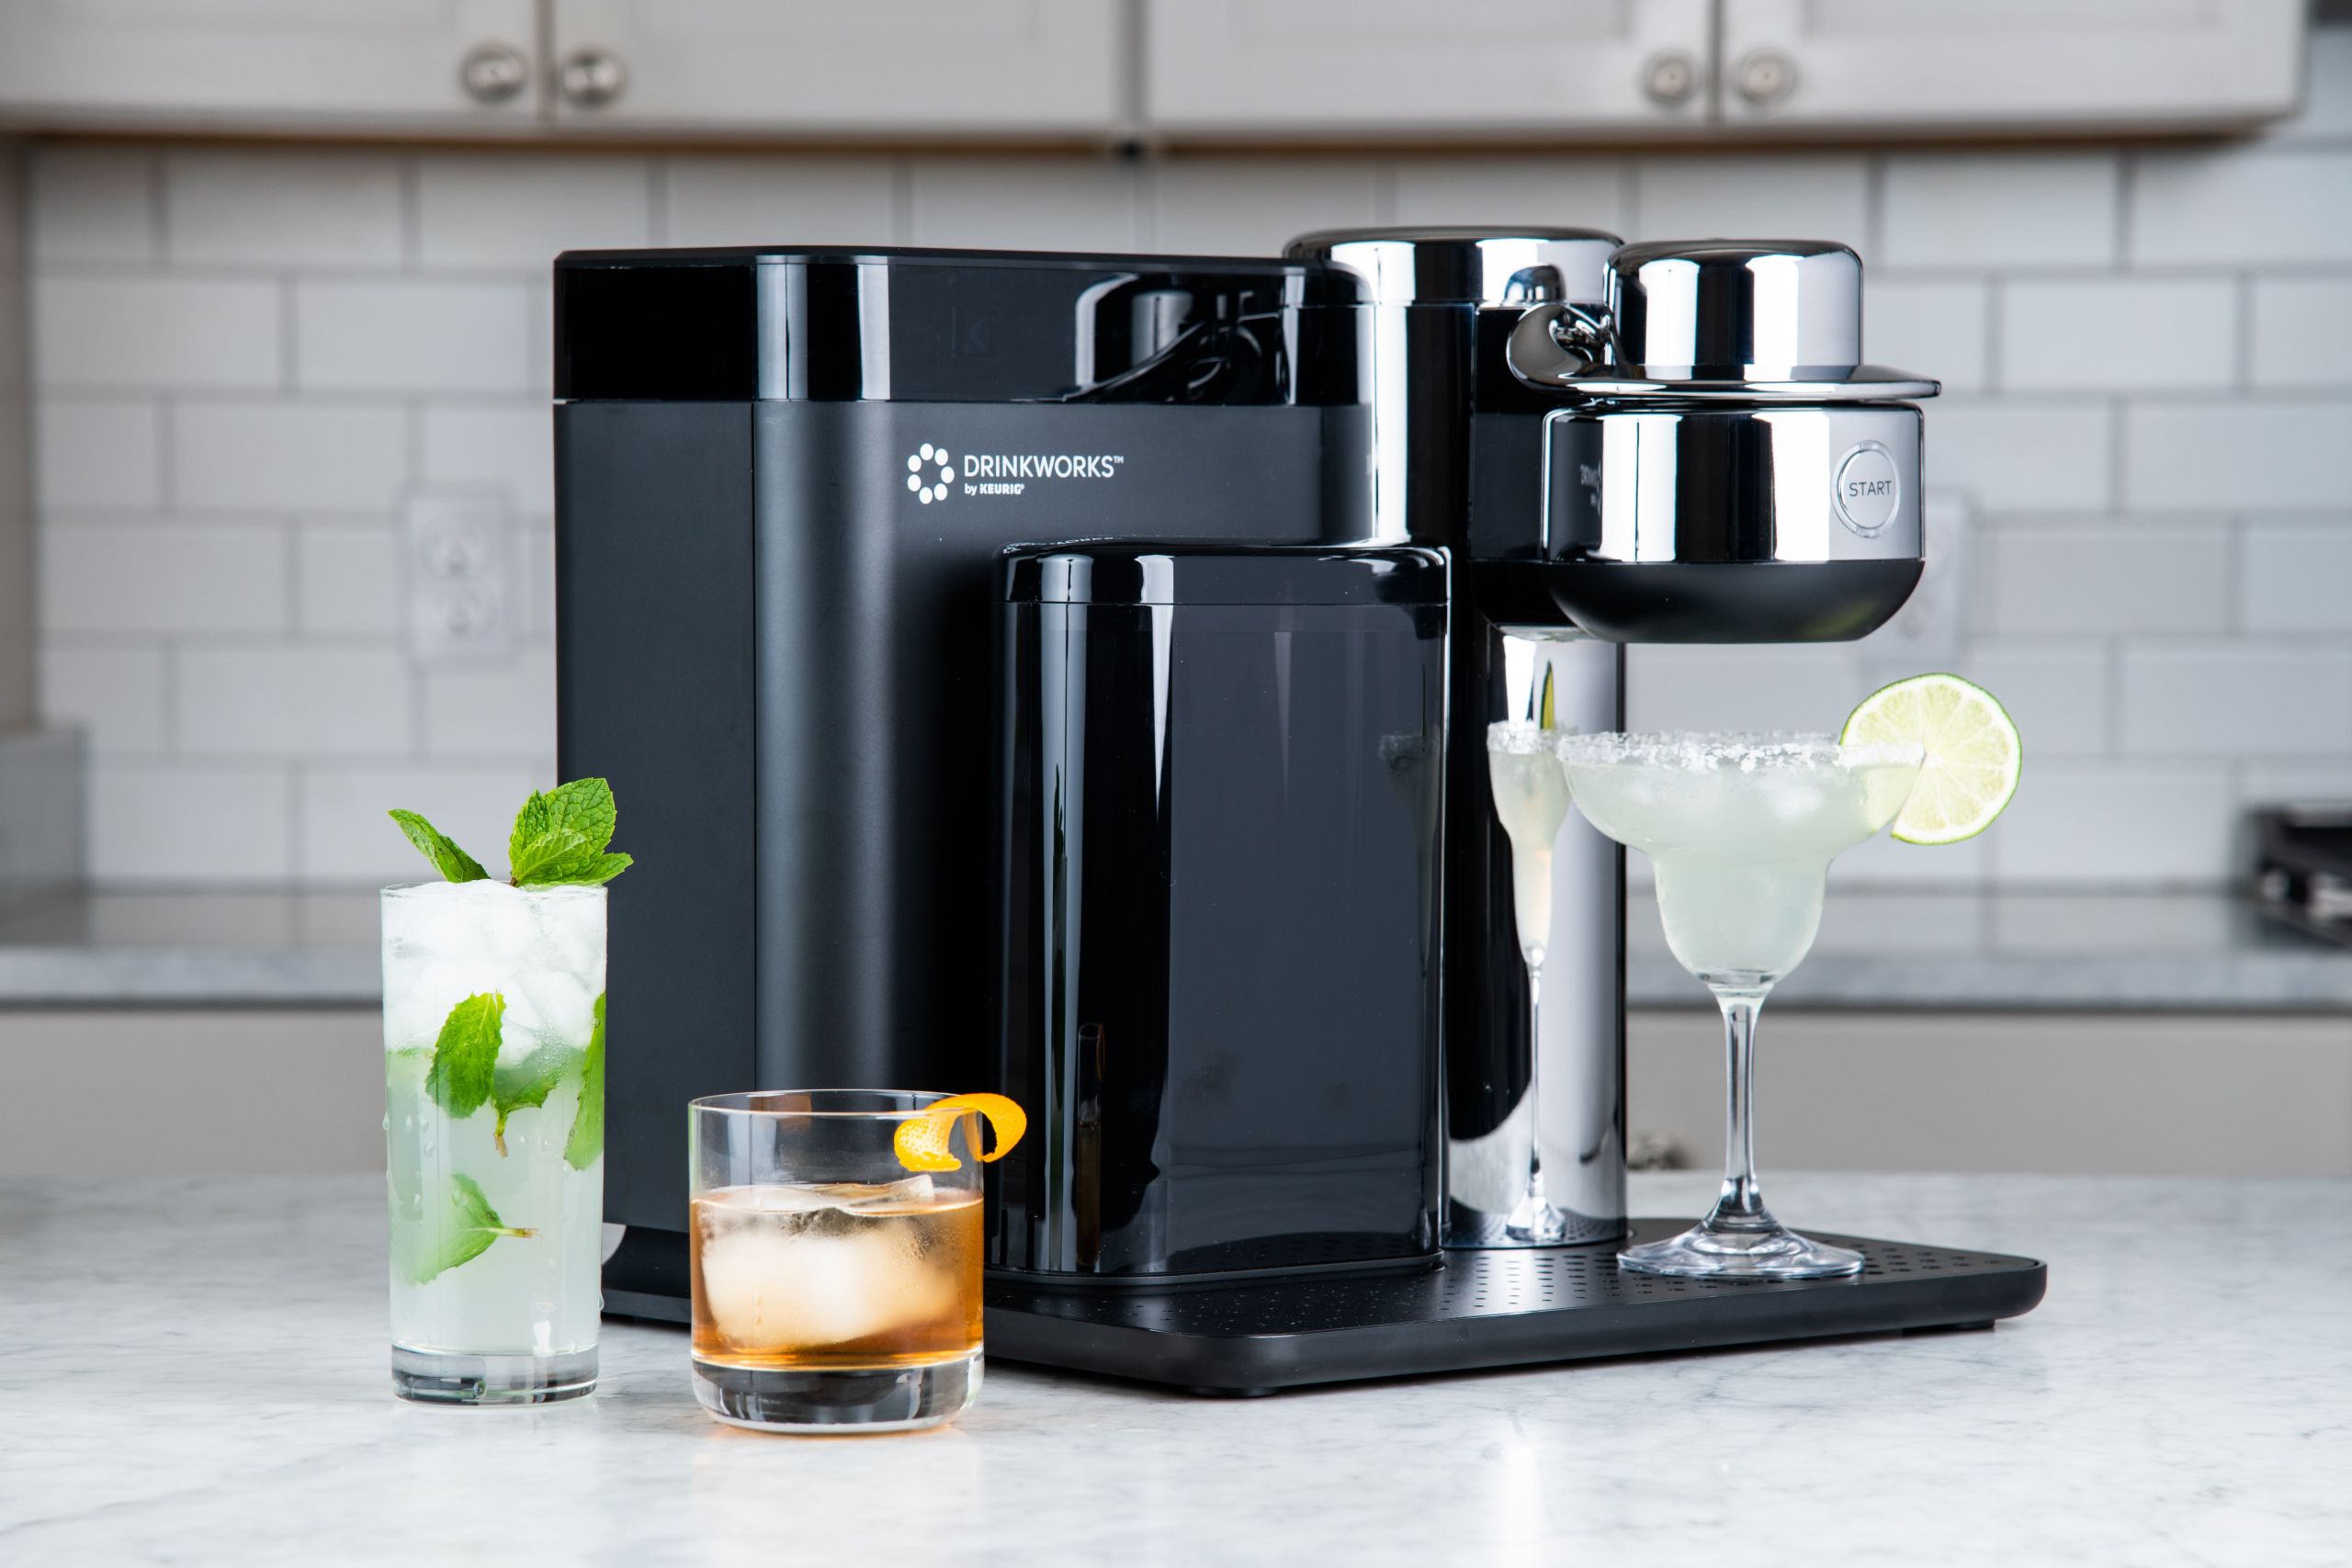 Keurig For Cocktails
 Keurig and Anheuser Busch Cocktail Maker Ready to Expand